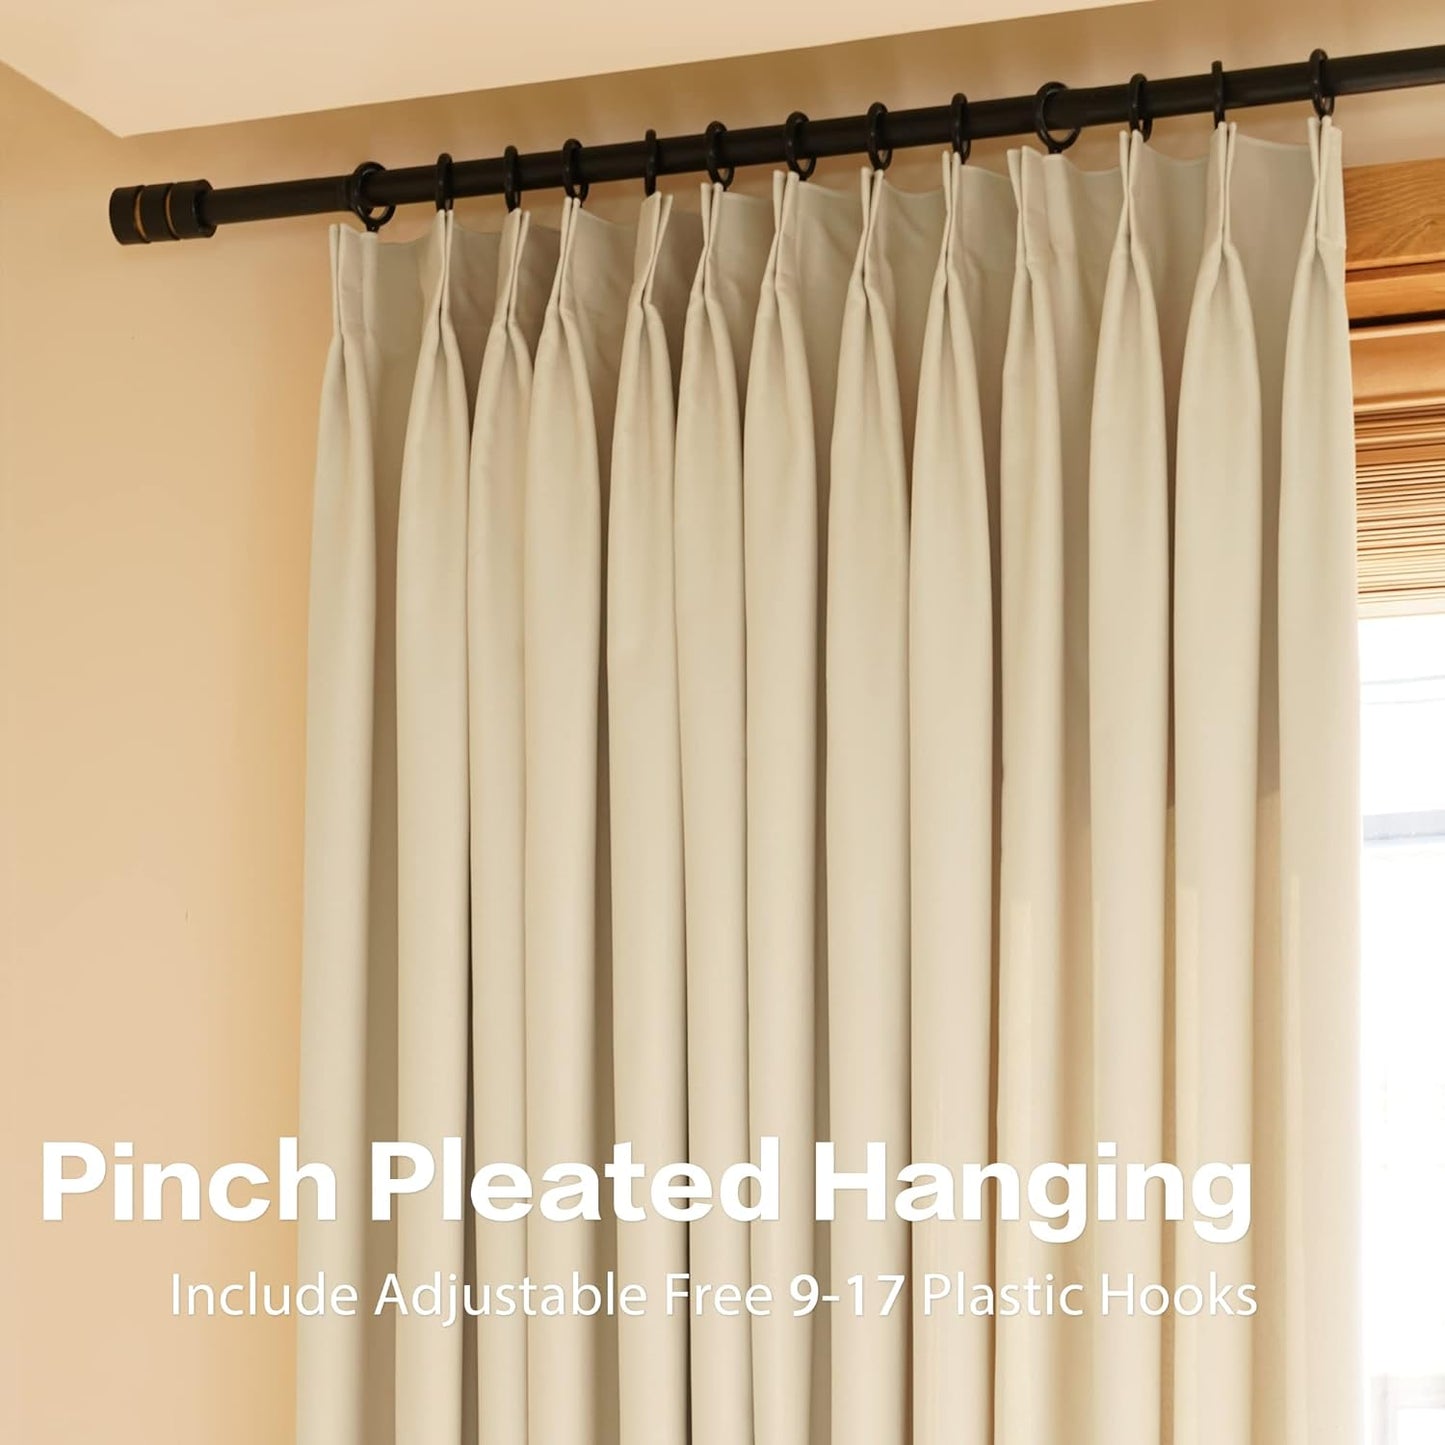 HUTO Beige Pinch Pleated Curtains Thermal Insulated Room Darkening Window Treatment Panel for Living Room, Bedroom, Kitchen, Small Window, 52 by 63 Inches Long, 1 Panel  HUTO   